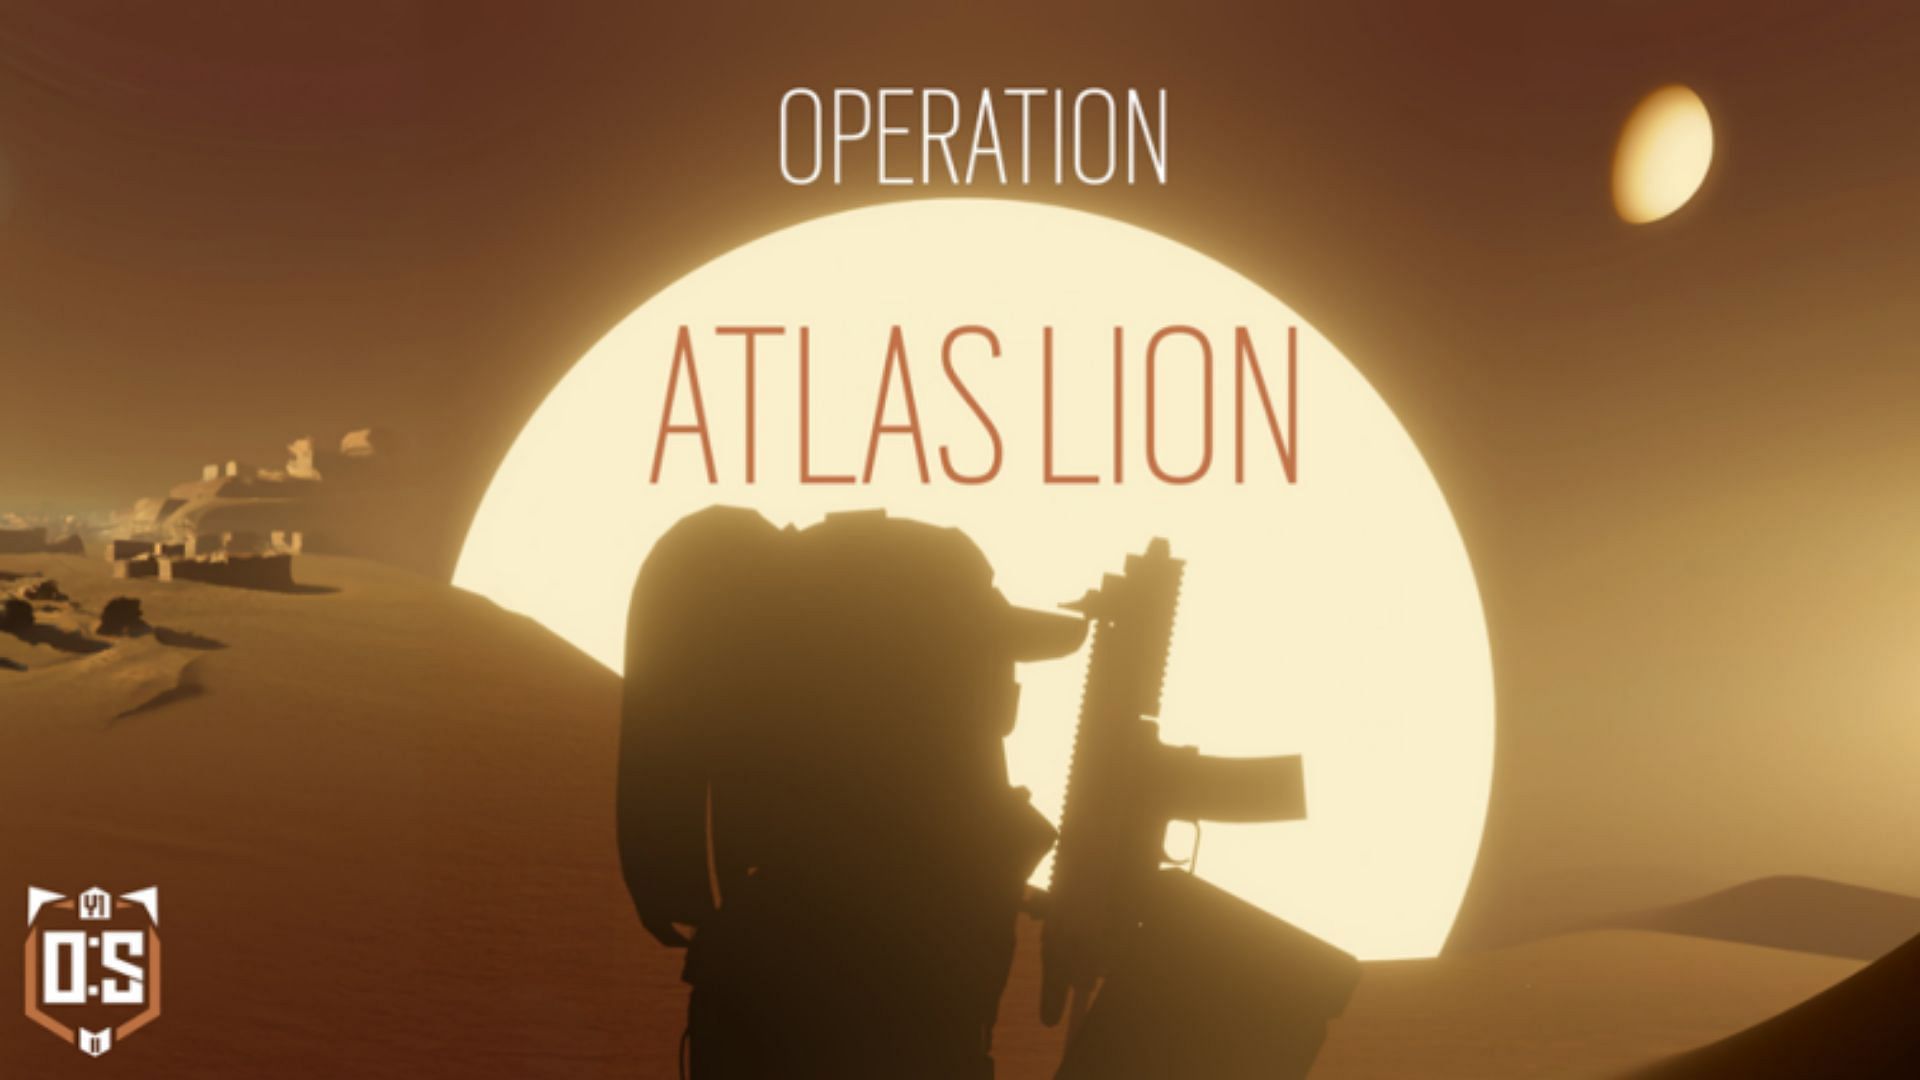 Codes for Operations Siege and their importance (Image via Roblox)